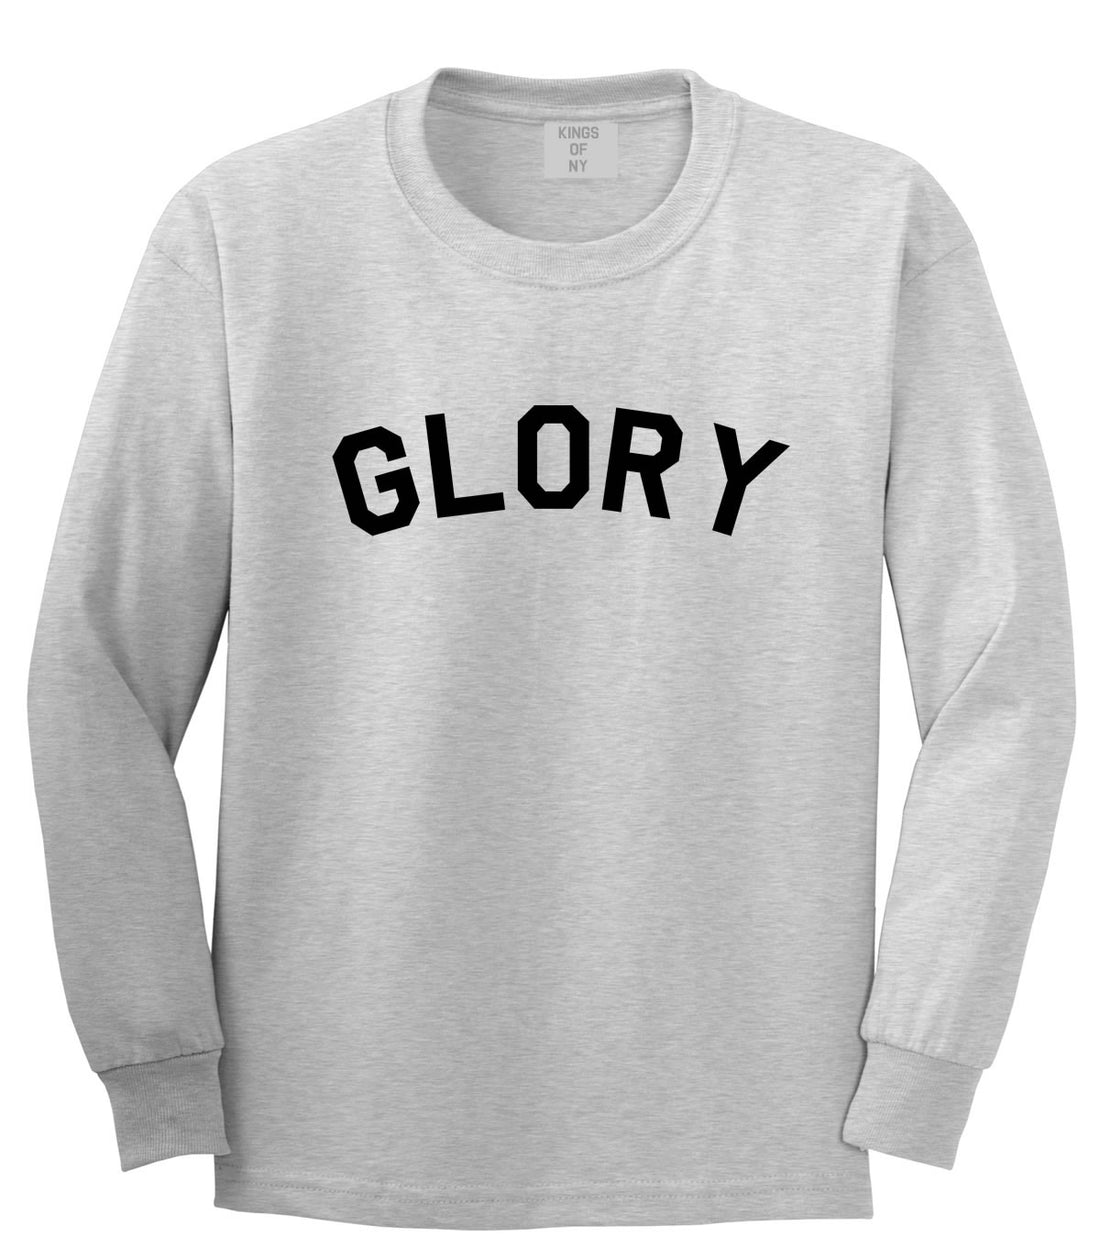 GLORY New York Champs Jersey Long Sleeve T-Shirt in Grey